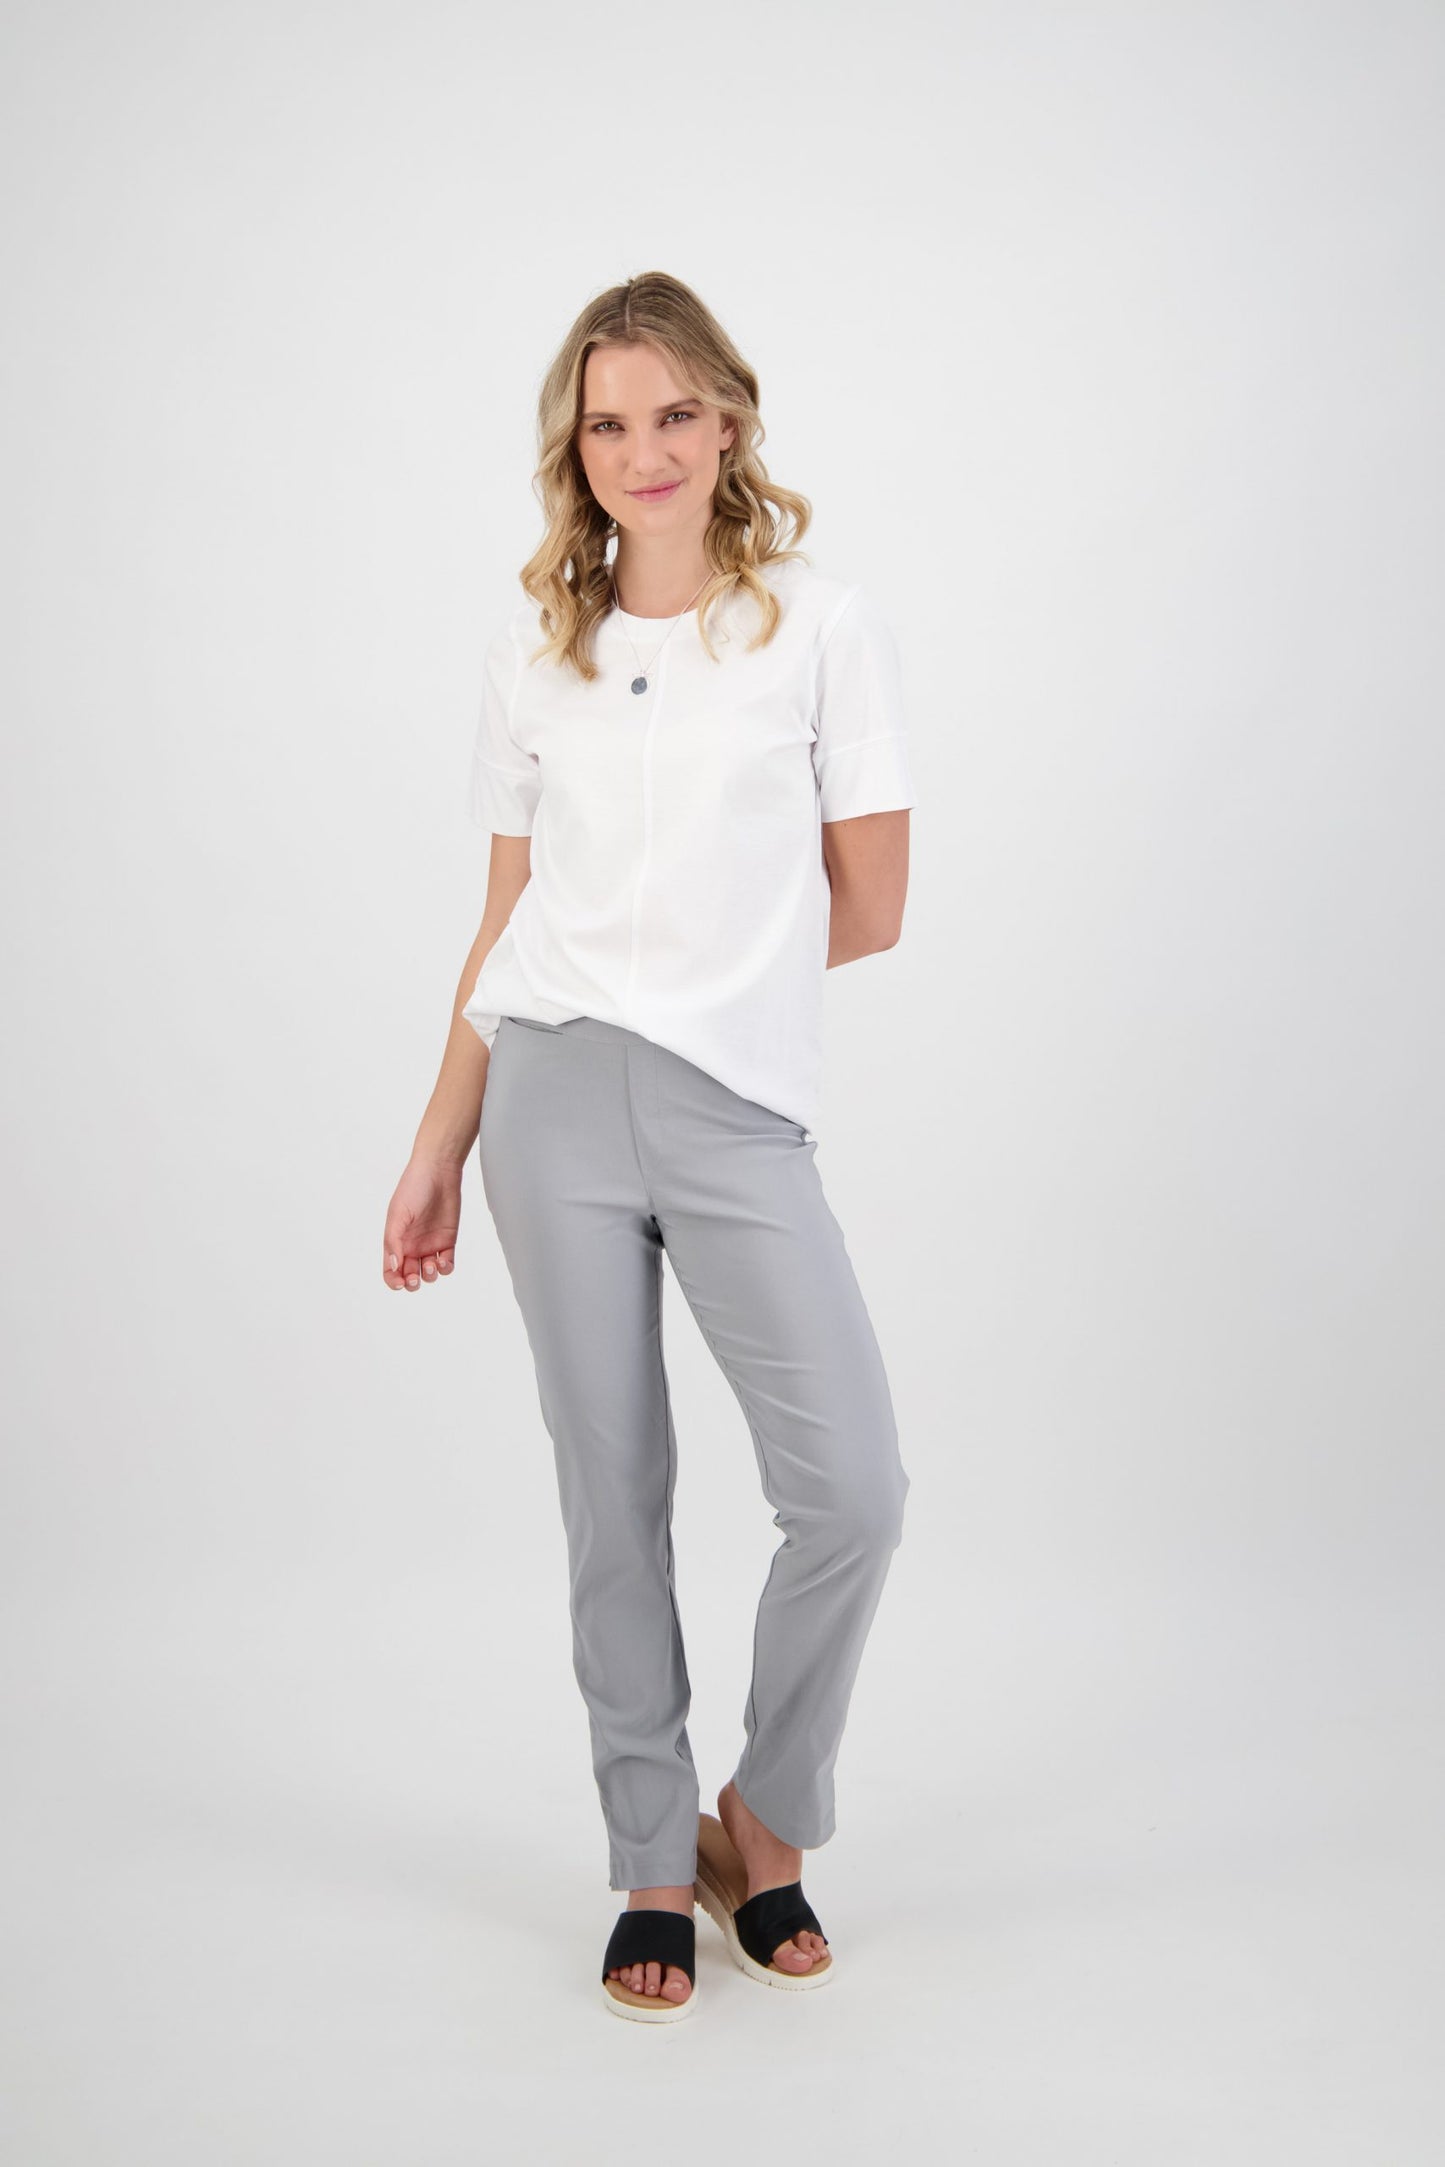 Macjays - M5261 - Caprice in Faille Pant - Silver